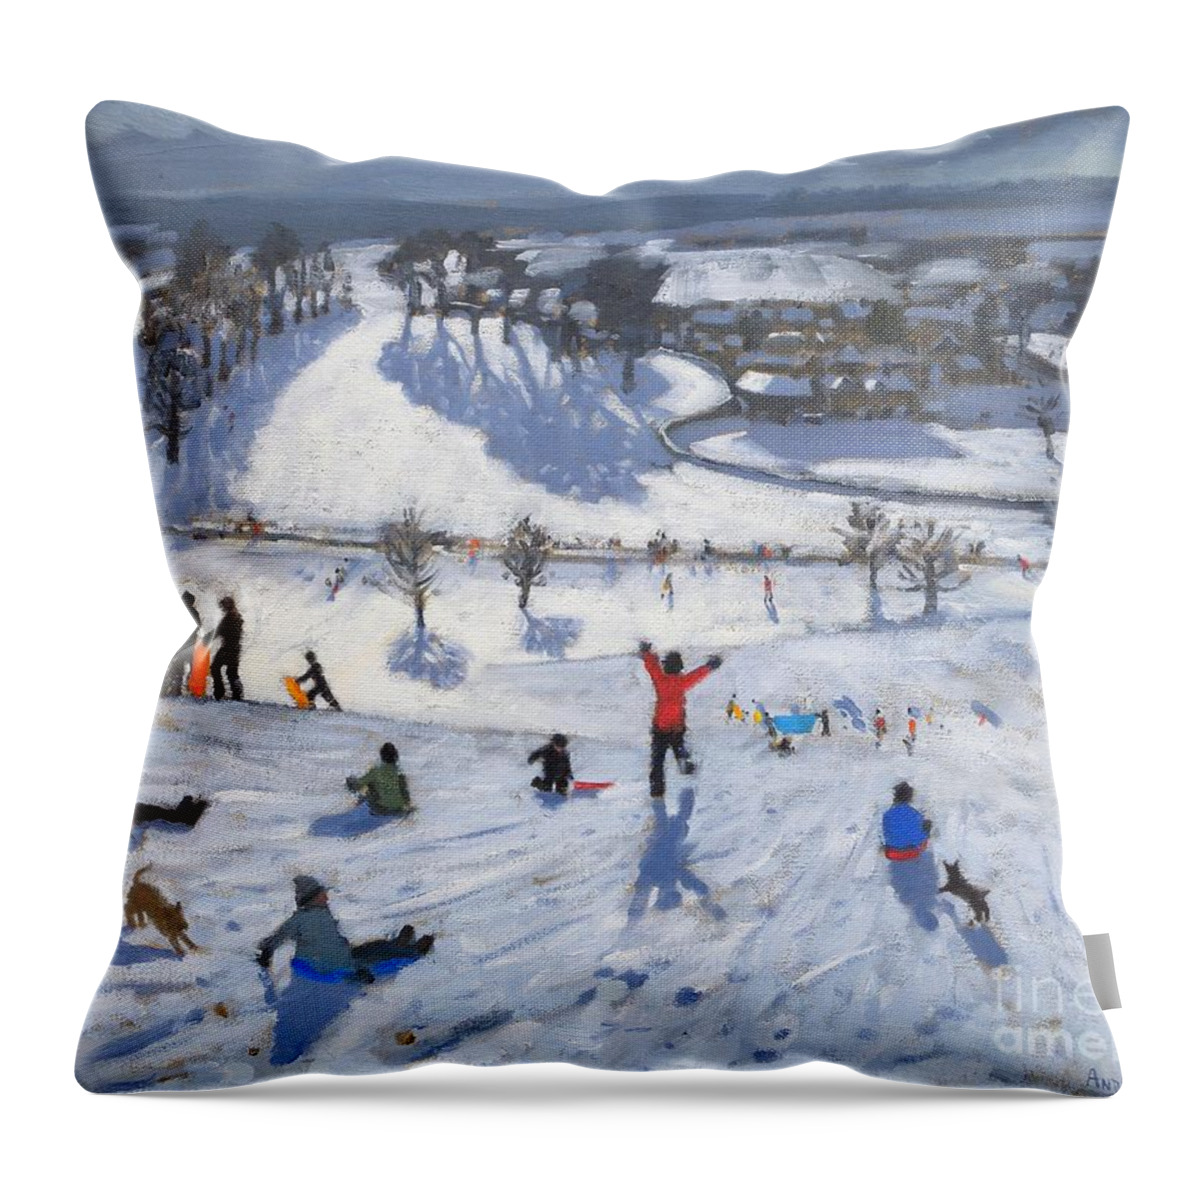 Winter Fun Throw Pillow featuring the painting Winter Fun by Andrew Macara